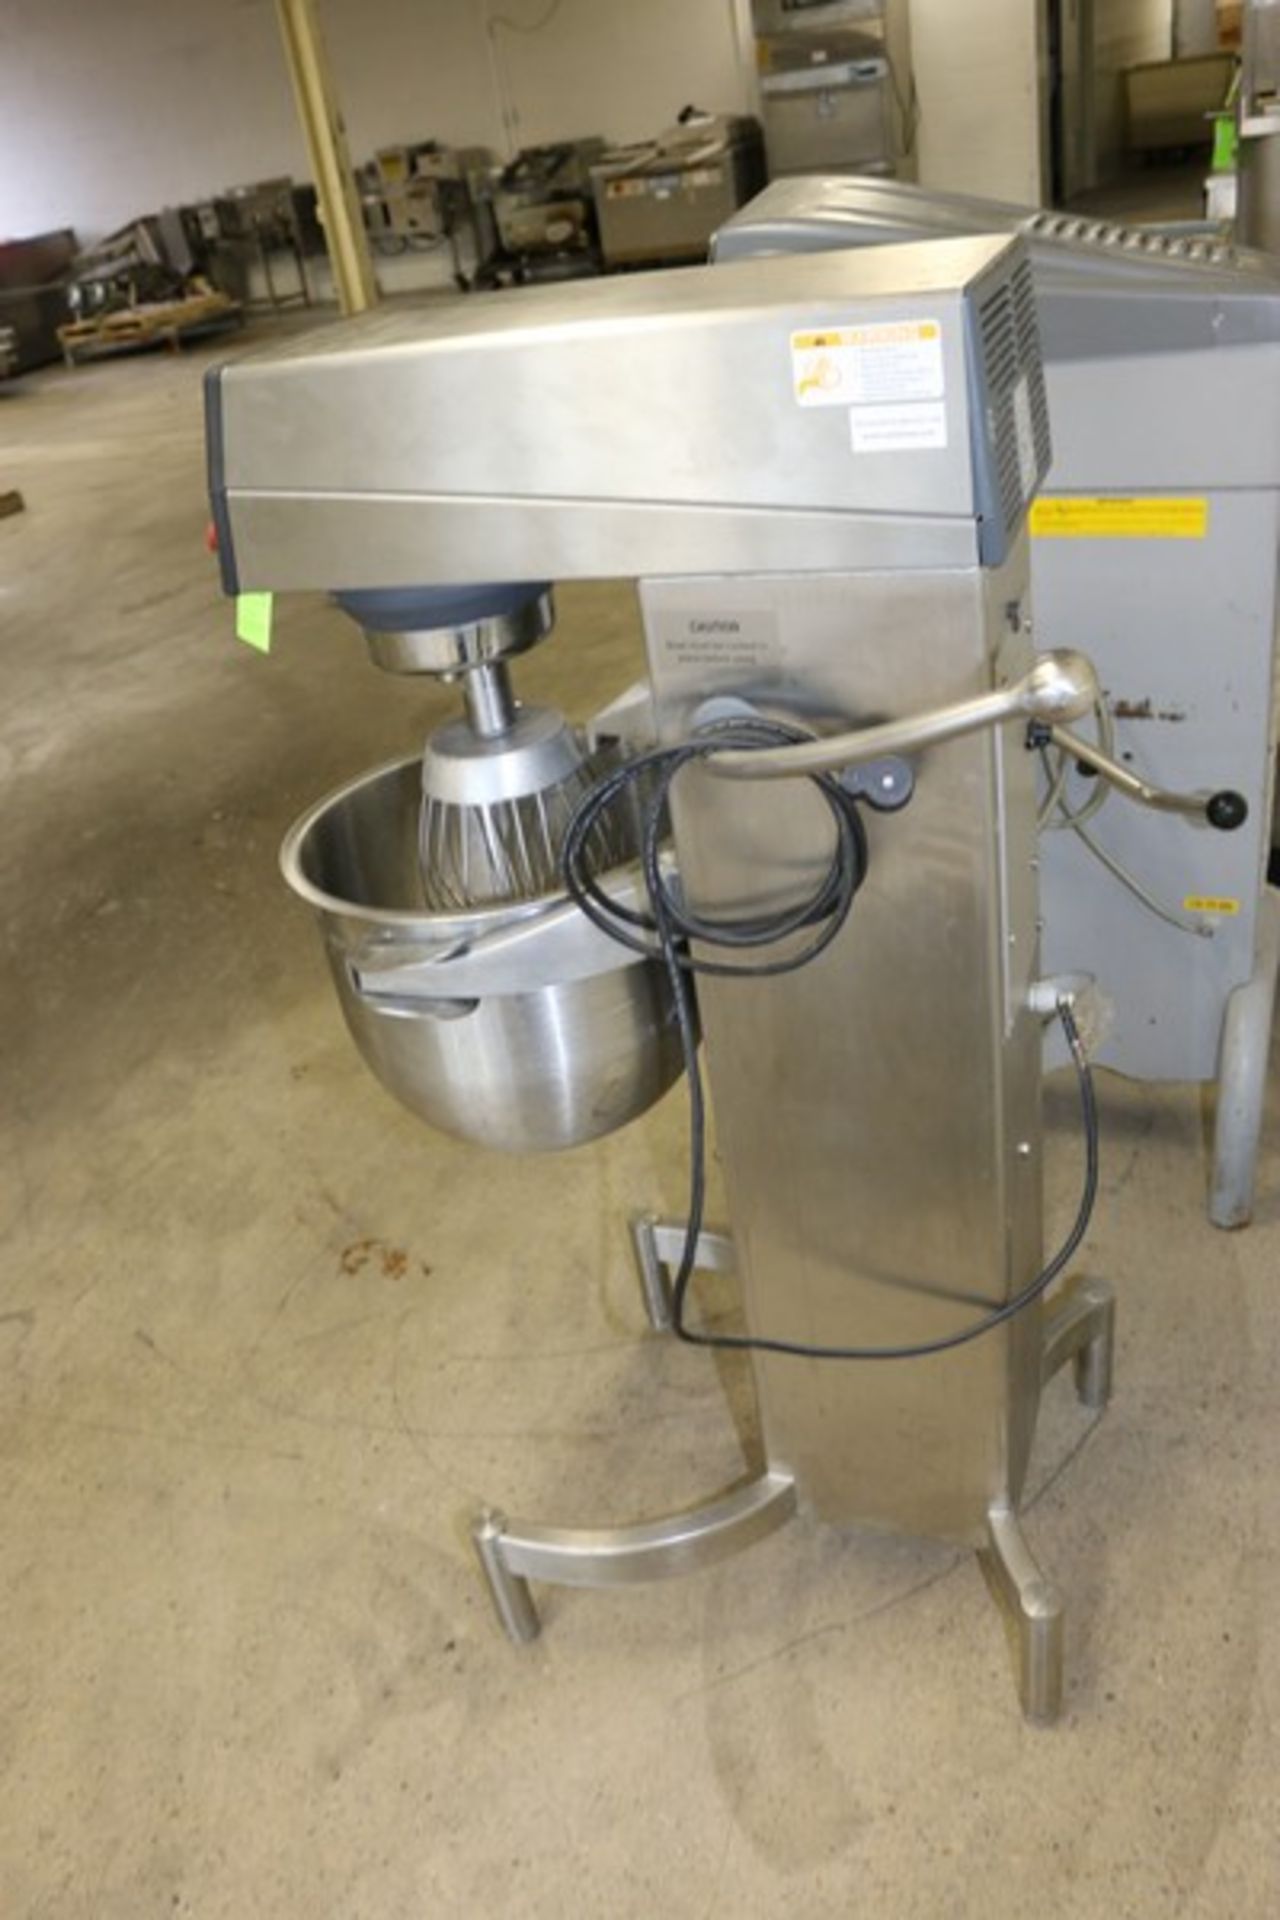 2017 Varimixer Bakery Mixer,M/N V30K, Machine No.: 30005786, 115 Volts, 1 Phase, with S/S Mixing - Image 4 of 5